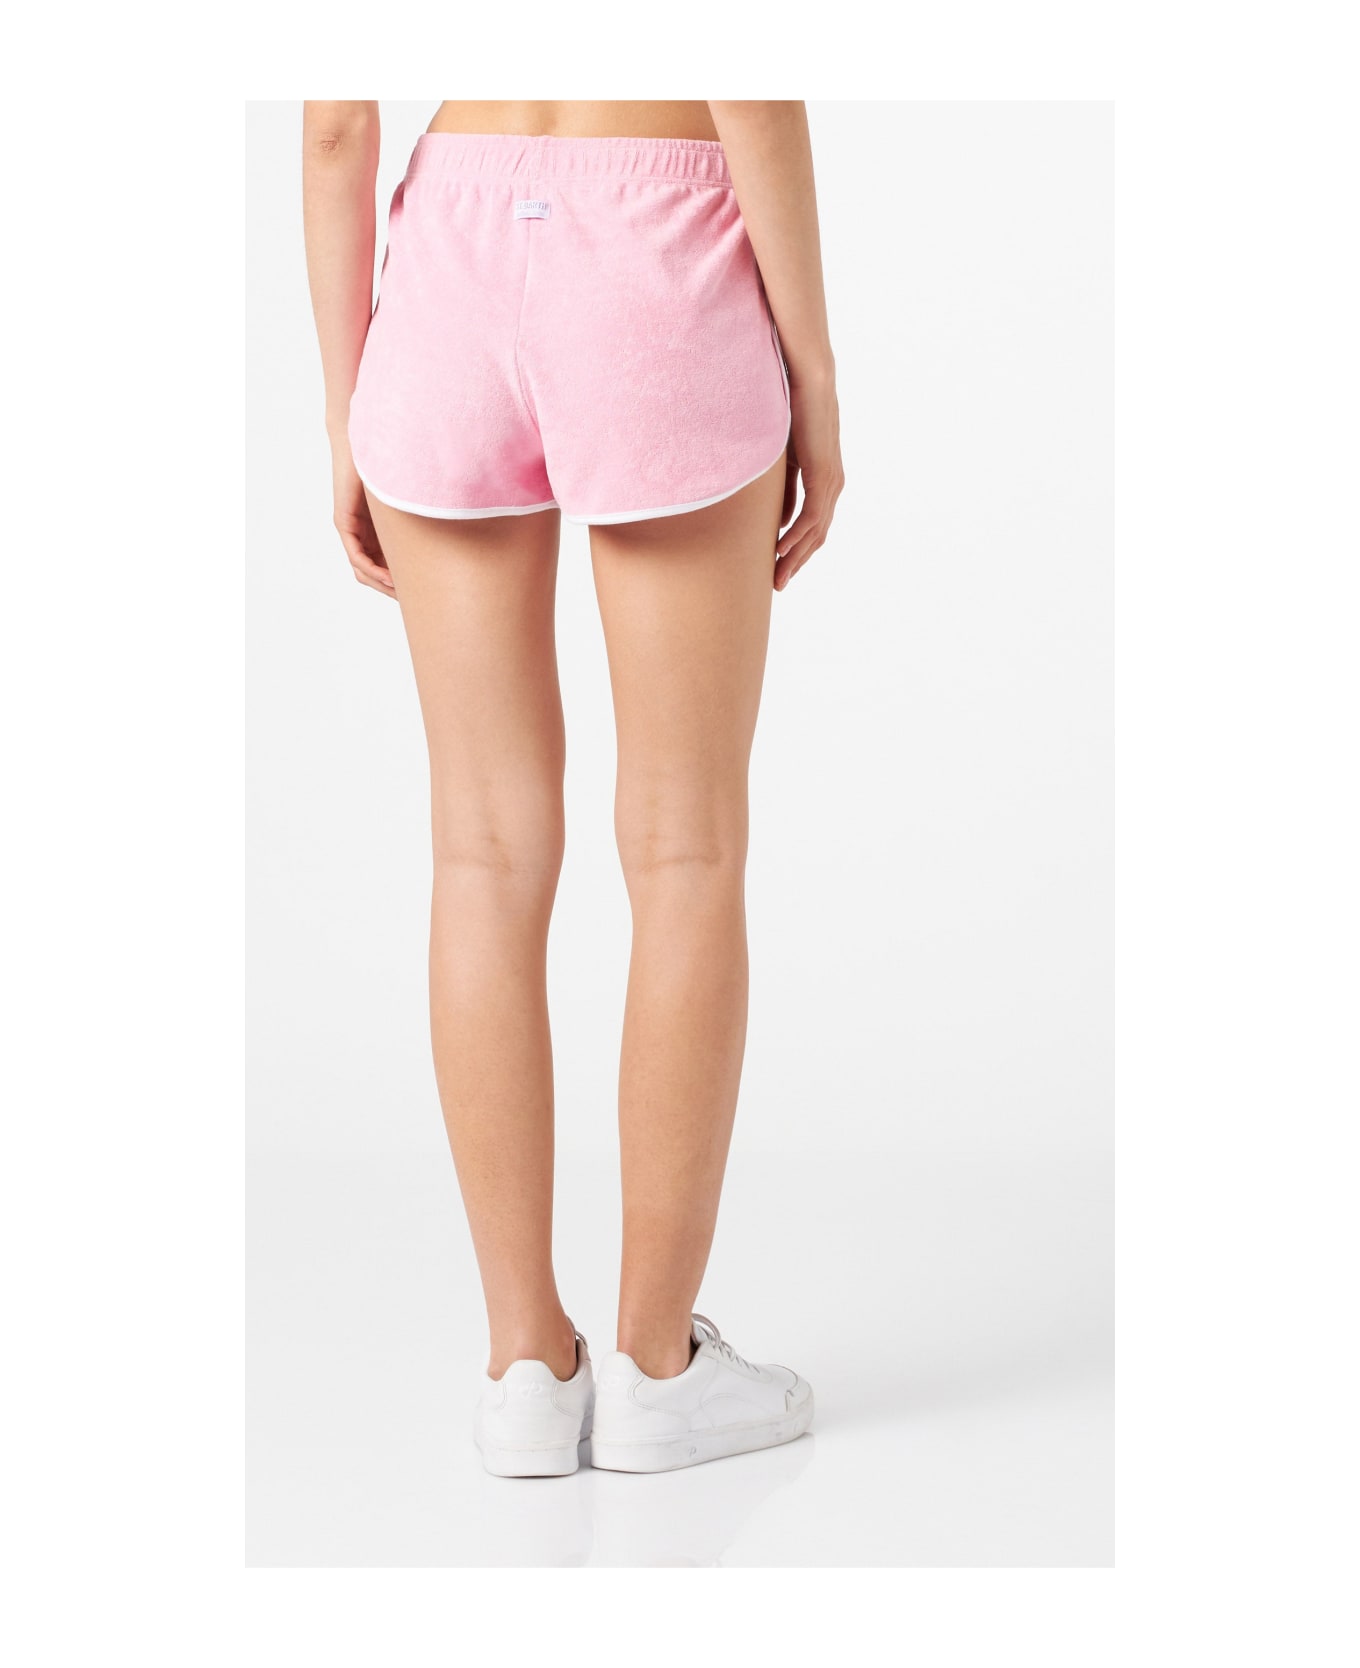 MC2 Saint Barth Woman Pink Terry Shorts With Piping | Melissa Satta Special Edition - PINK ショートパンツ